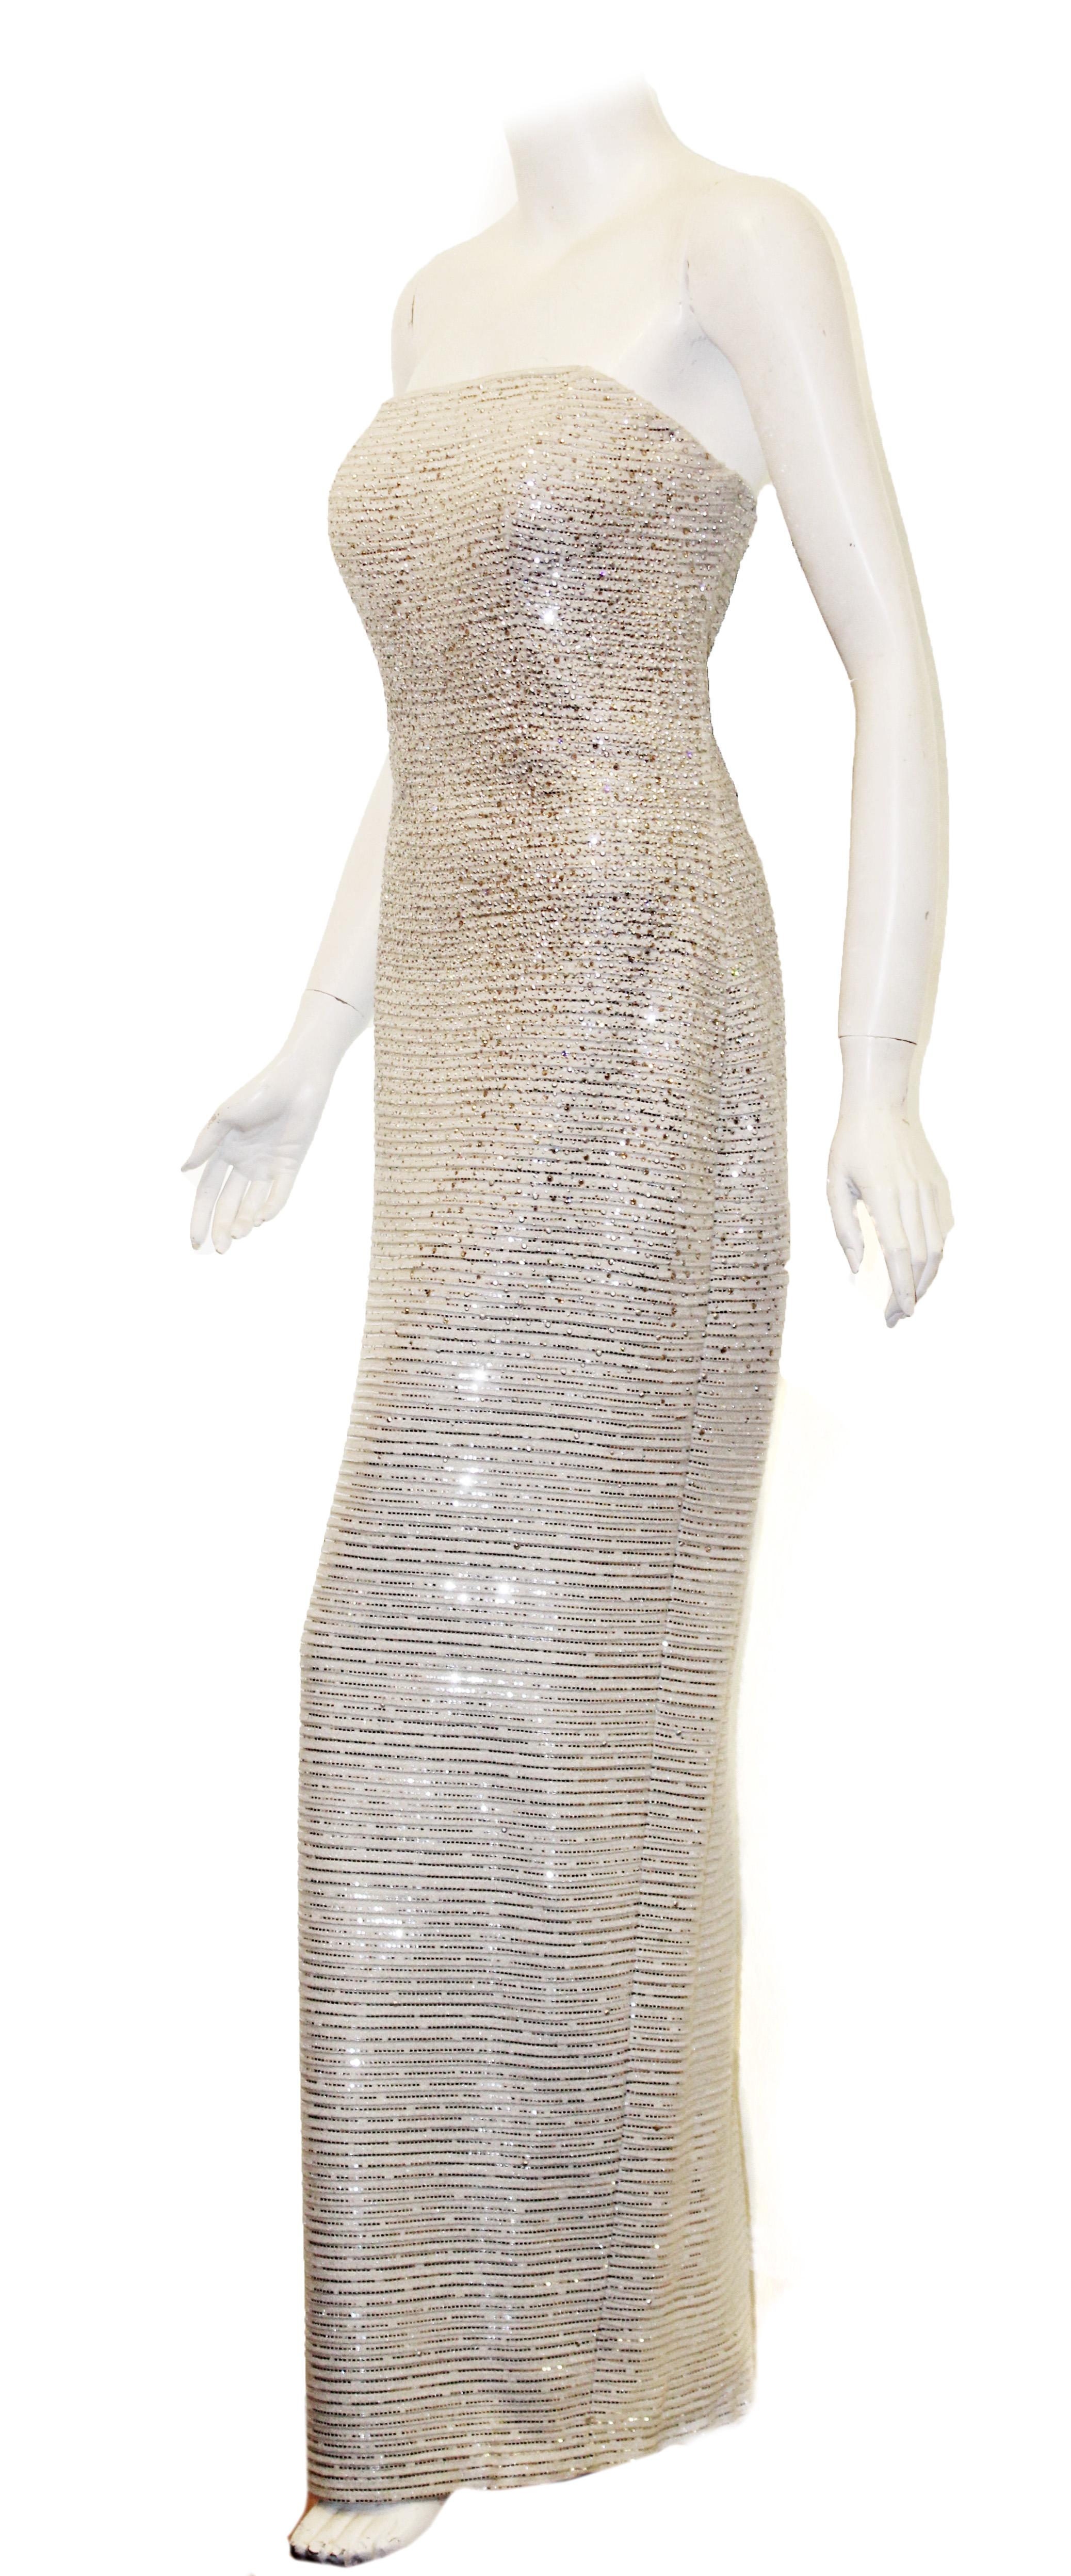 St. John white lattice knit gown interlaced with mini silver sequins and crystals throughout the dress creates a sparkling, signature sophisticated piece.  This strapless gown contains an attached internal bustier for added support.   Gown contains